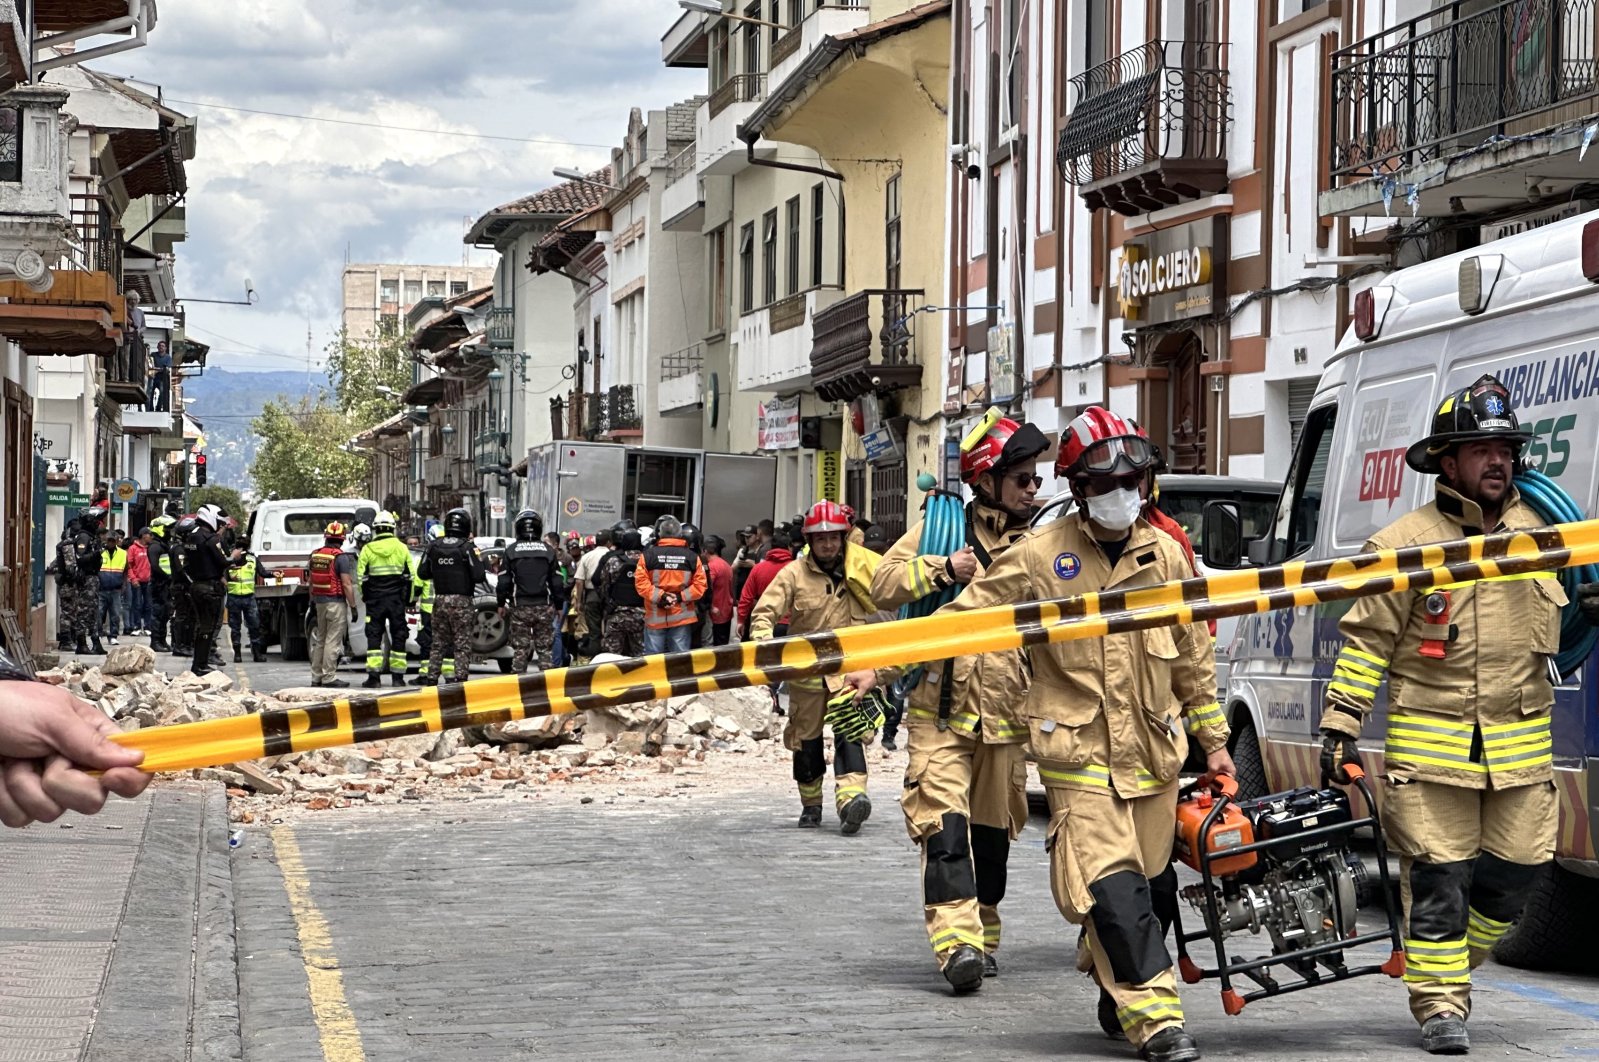 Emergency personnel respond to damage after an earthquake, Cuenca, Ecuador, March 18, 2023. (EPA Photo)